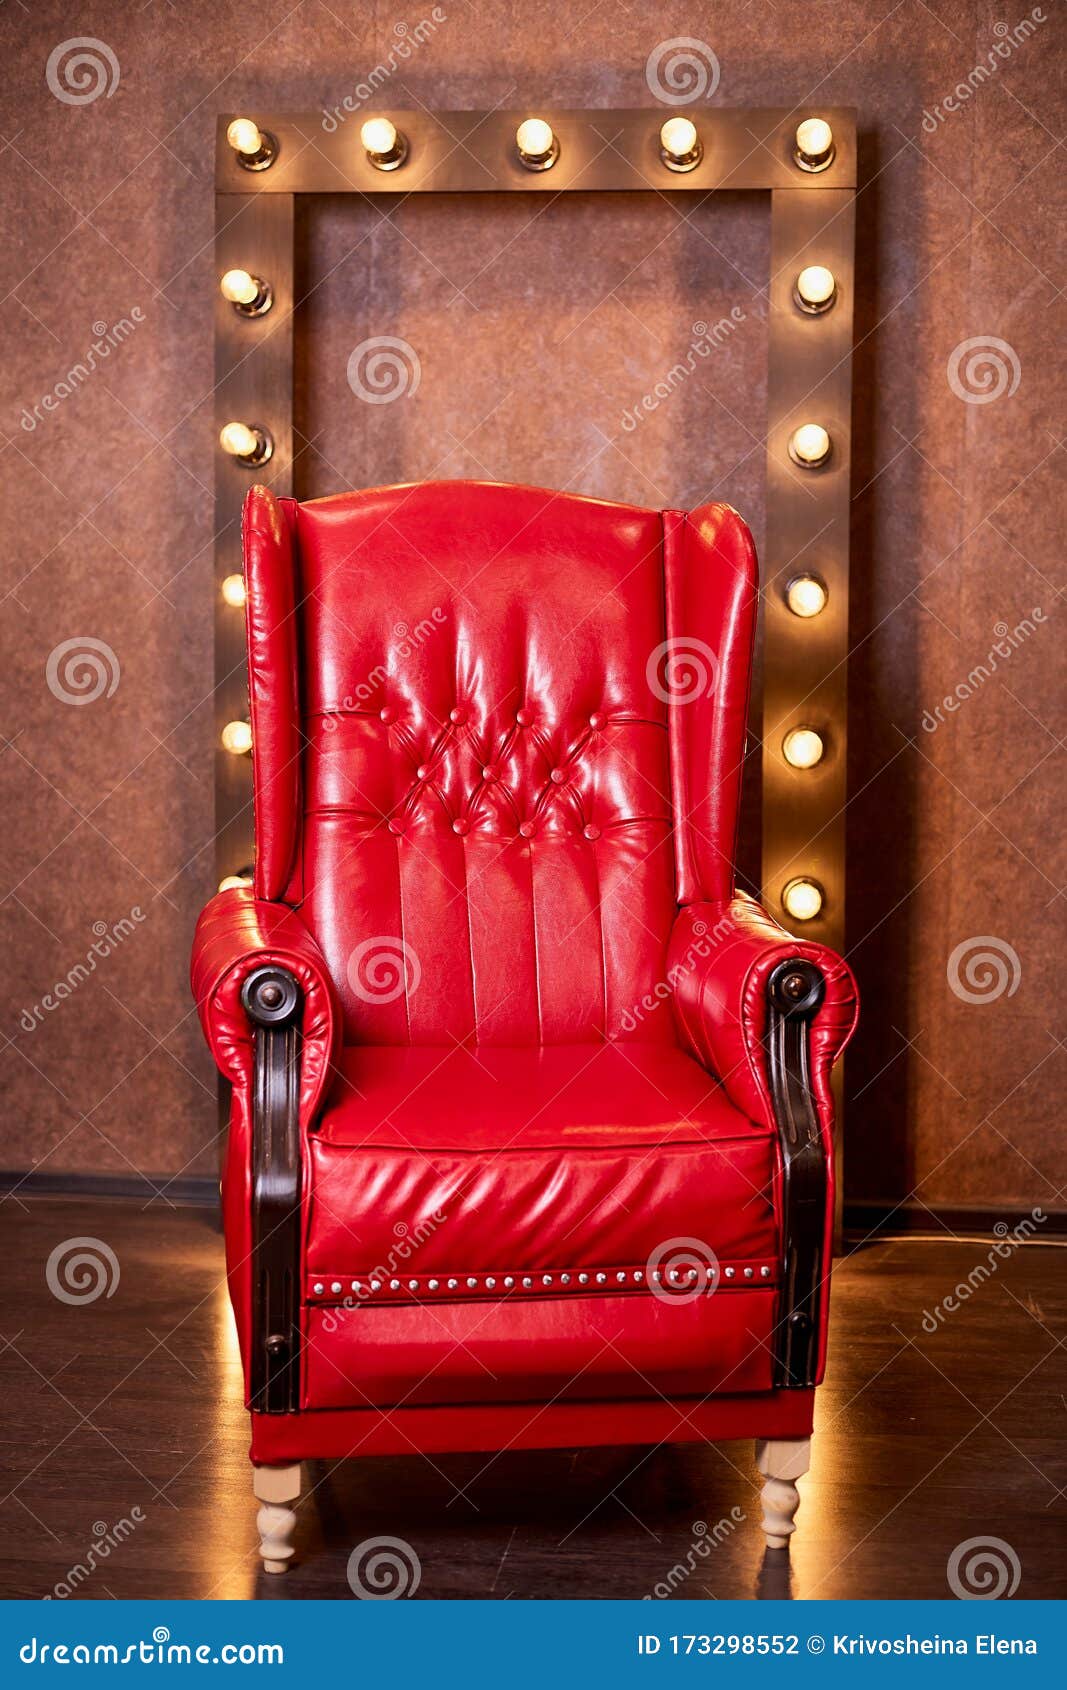 Old Vintage Red Leather Chair in a Dark Room and a Frame with Glowing  Lights in the Background. Background for a Photo Shoot Stock Photo - Image  of classic, fabric: 173298552